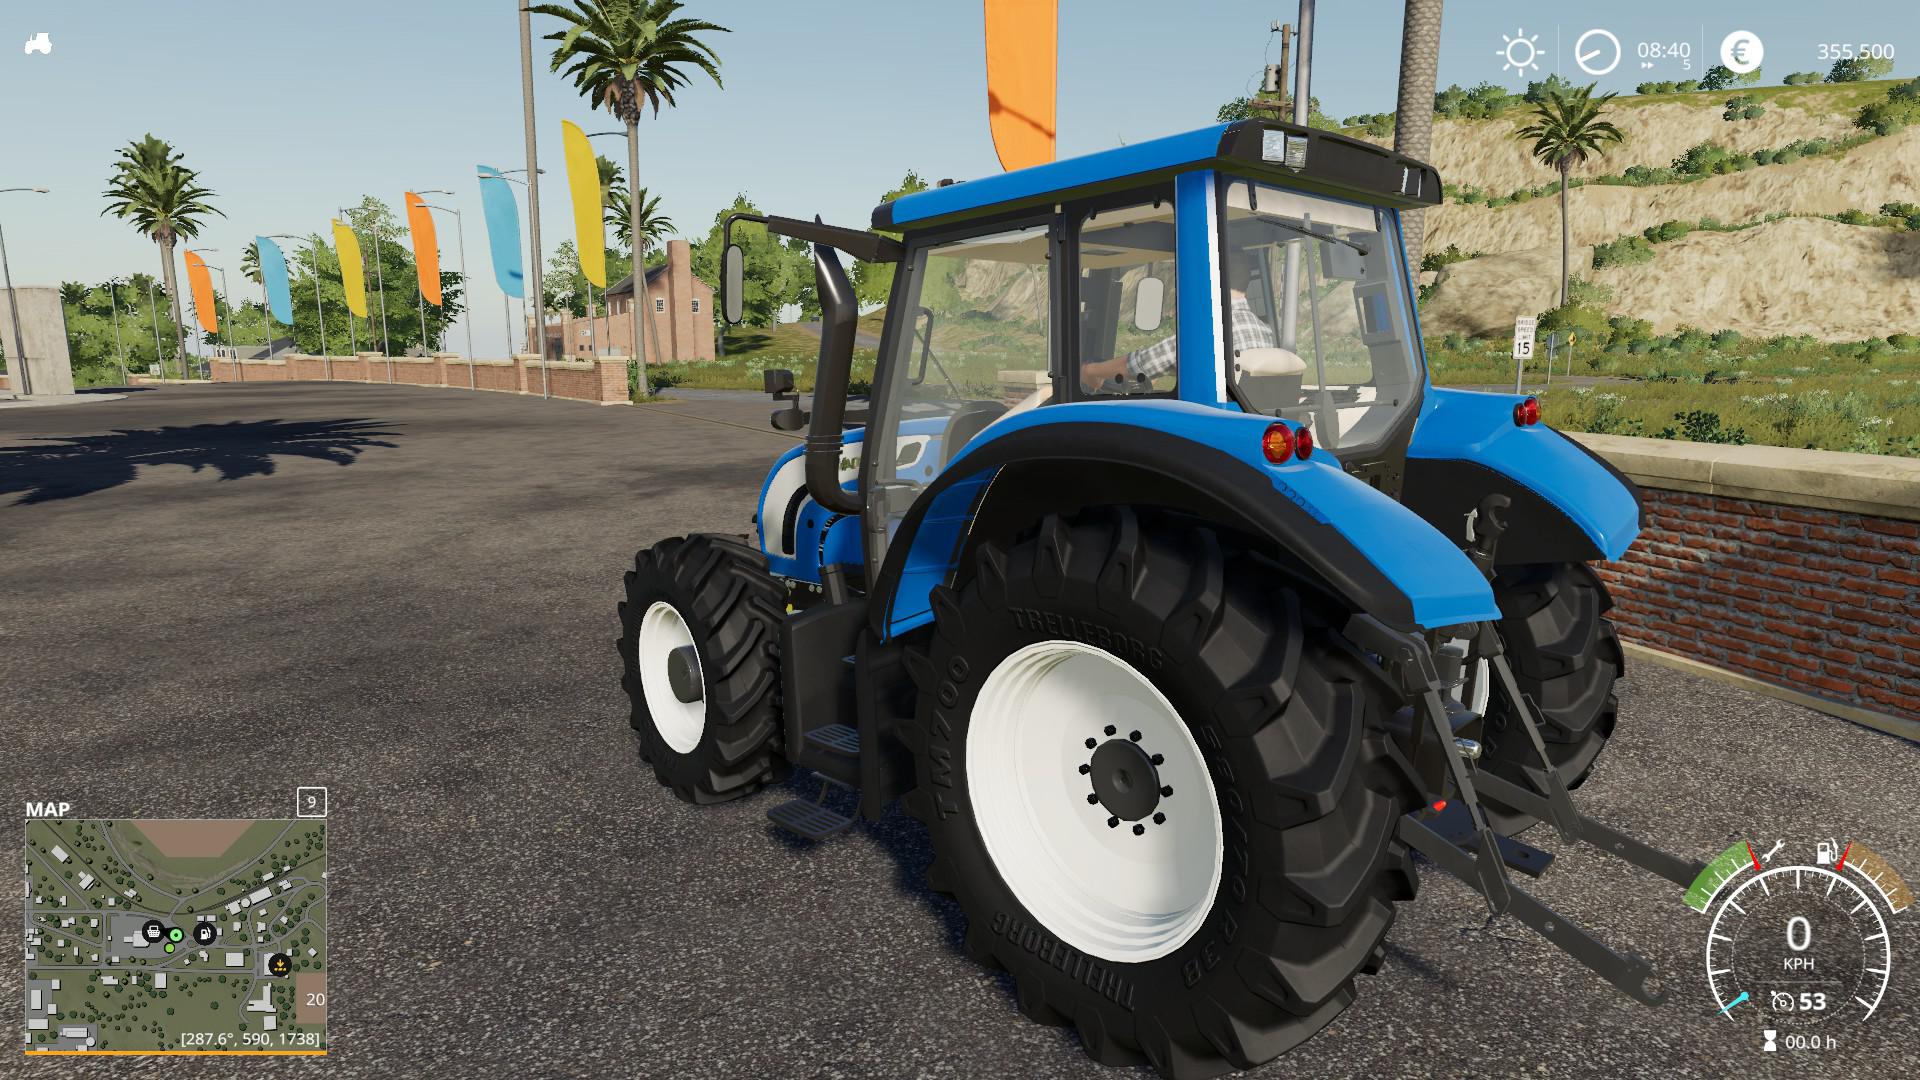 Fs19 Old Valtra N142 Tractor Farming Simulator 19 Mods Club 80830 Hot Sex Picture 1312